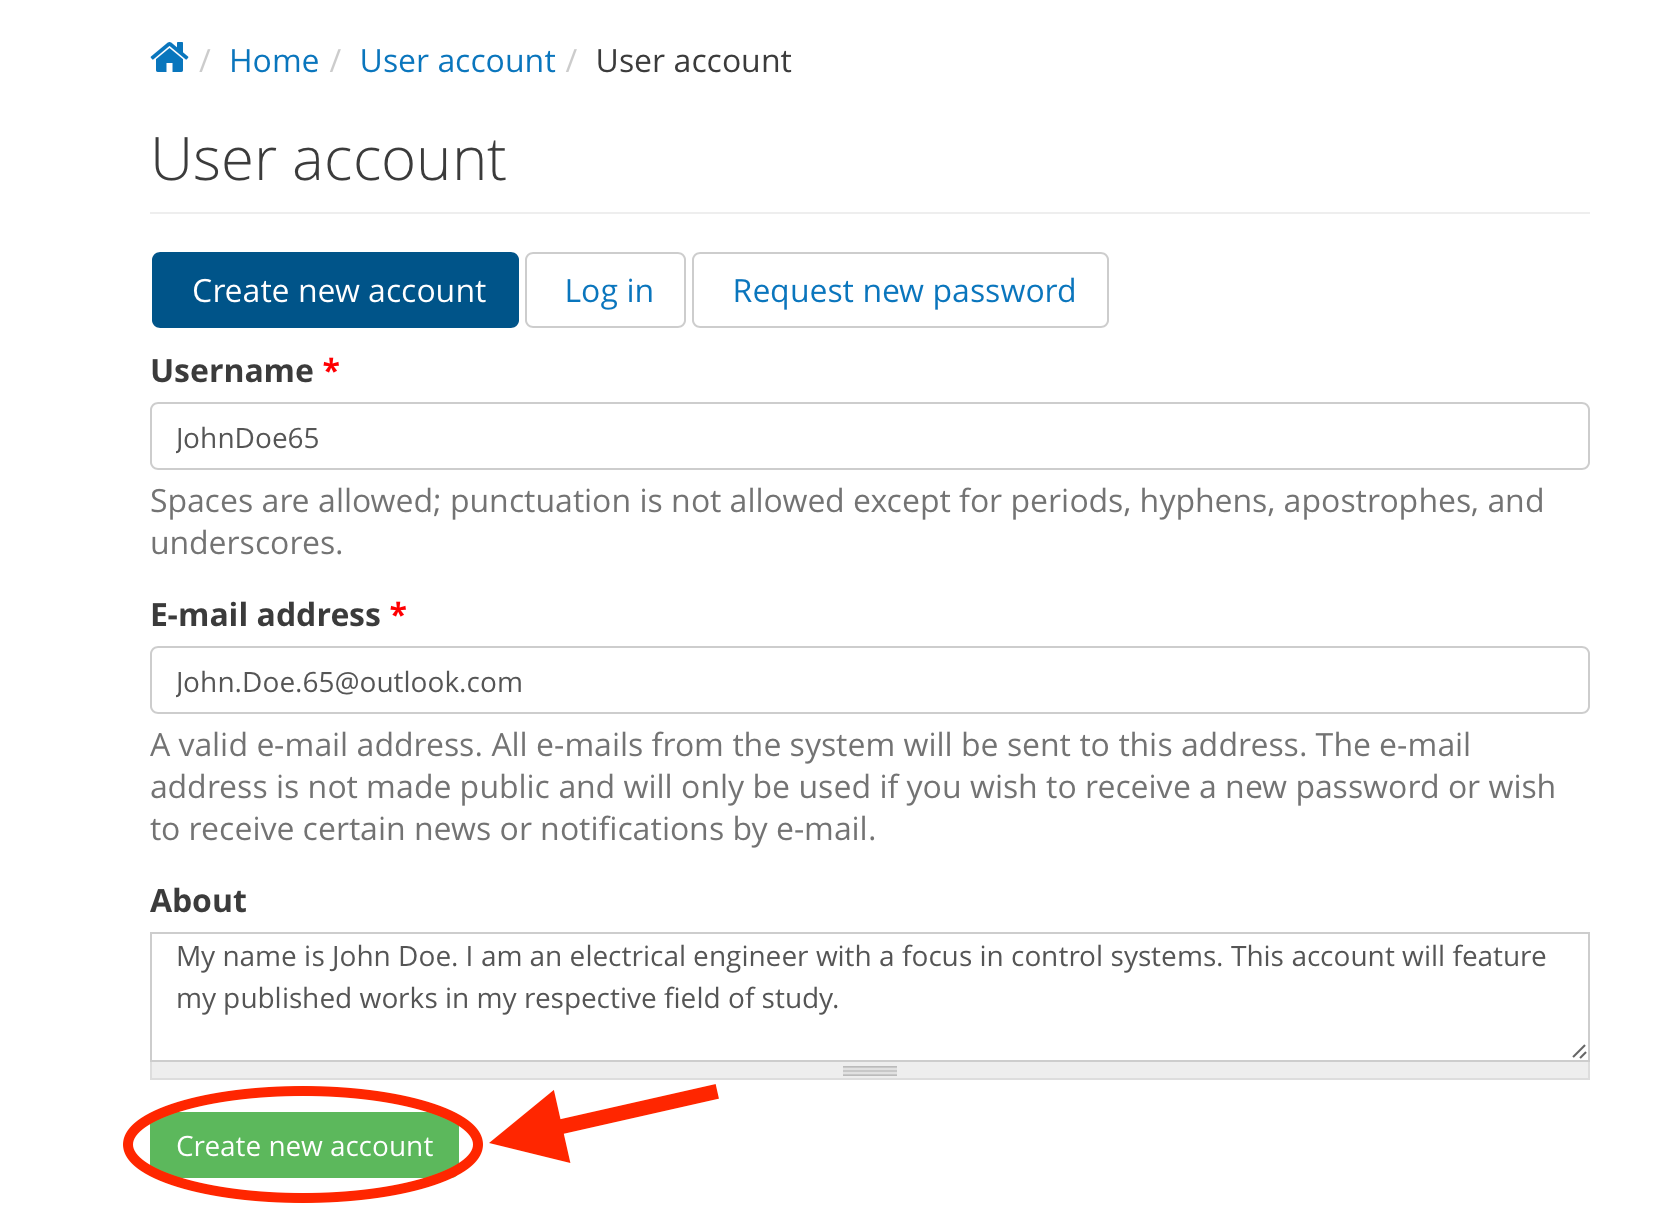 Screen capture of User Account creation page